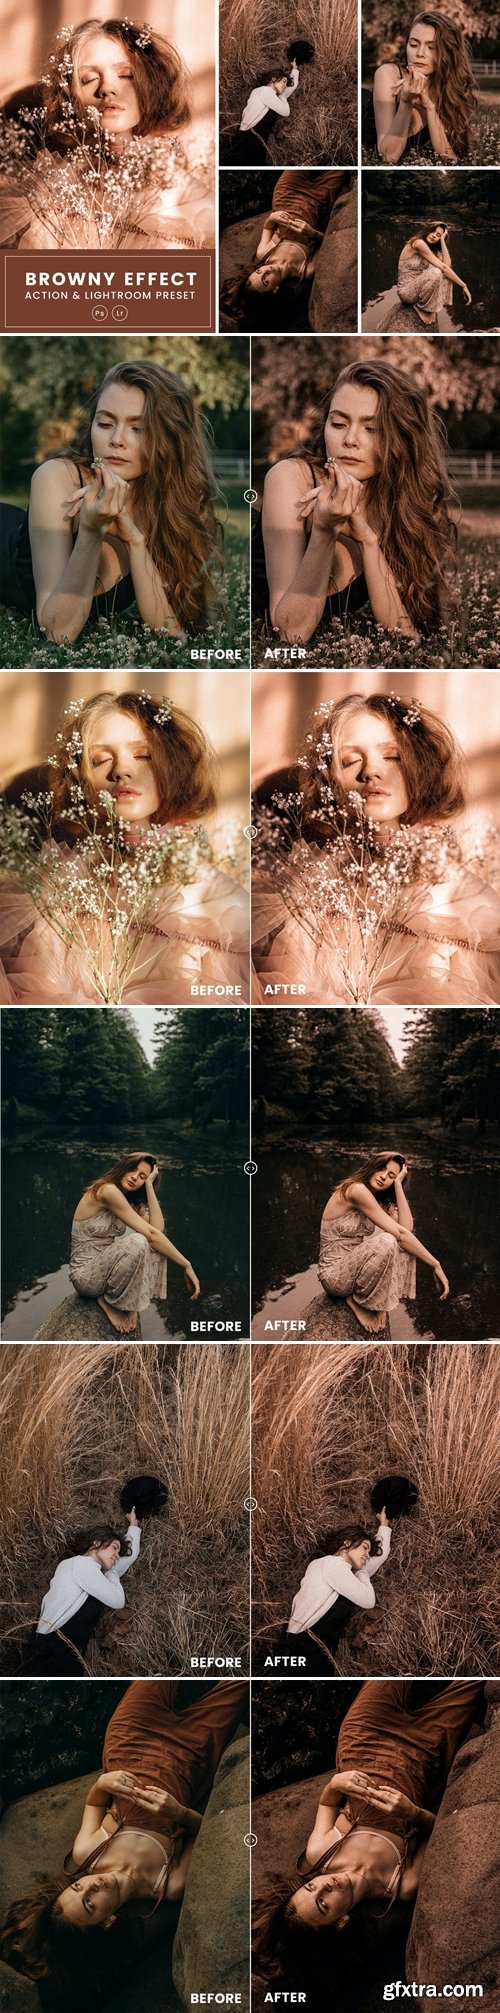 Browny Effect Action & Lightrom Presets